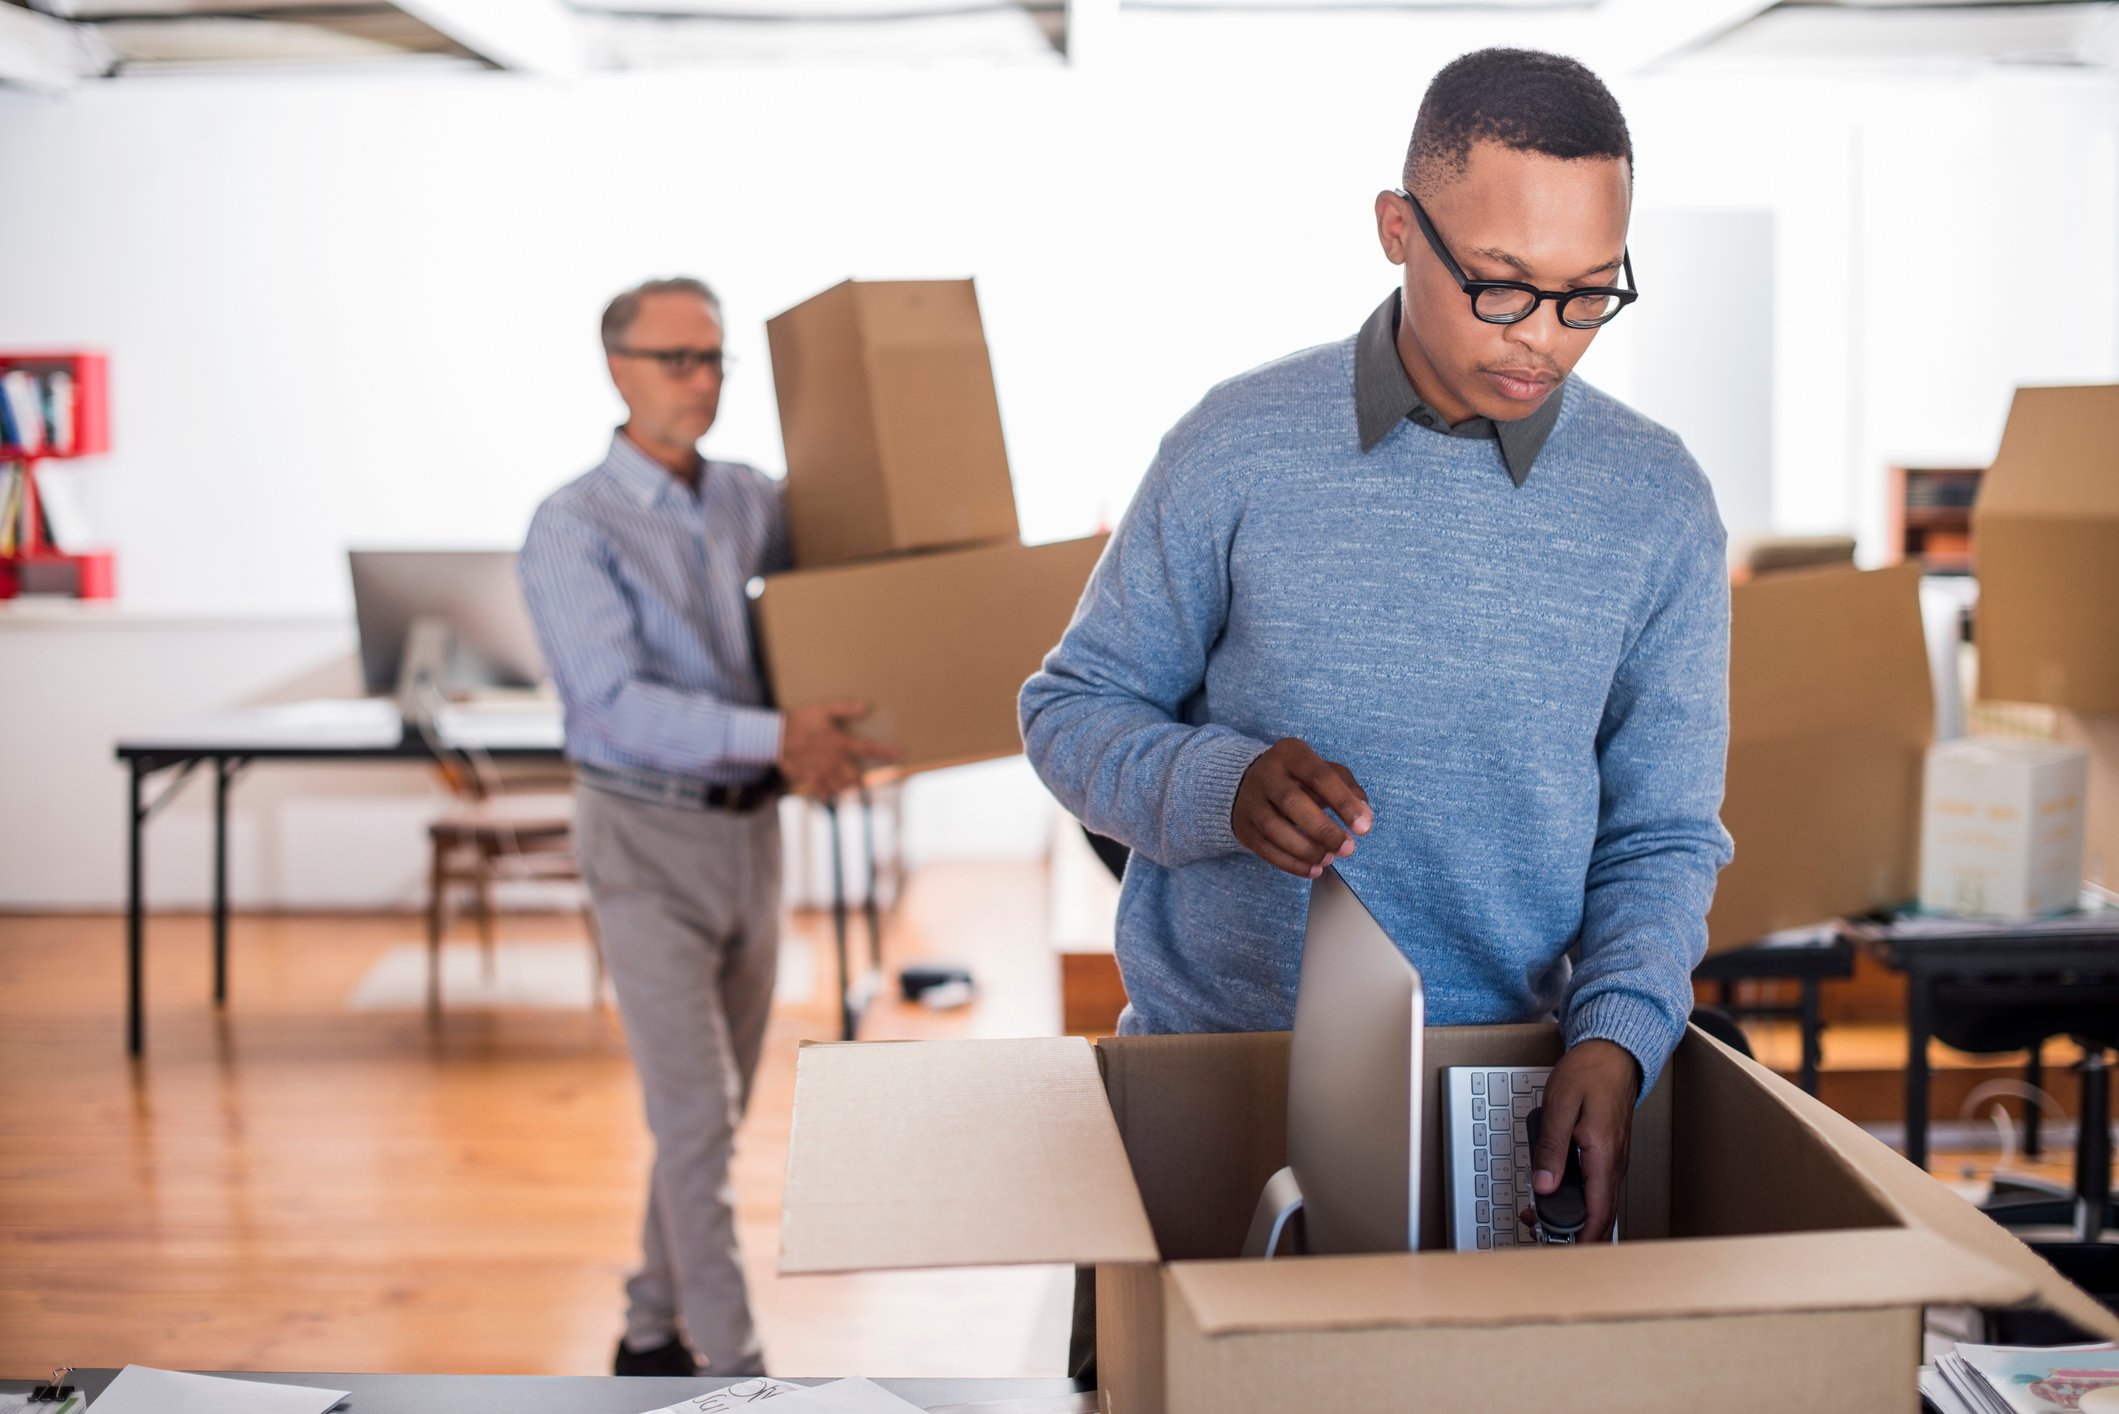 How To Open a Moving Company in 10 Steps - FindLaw